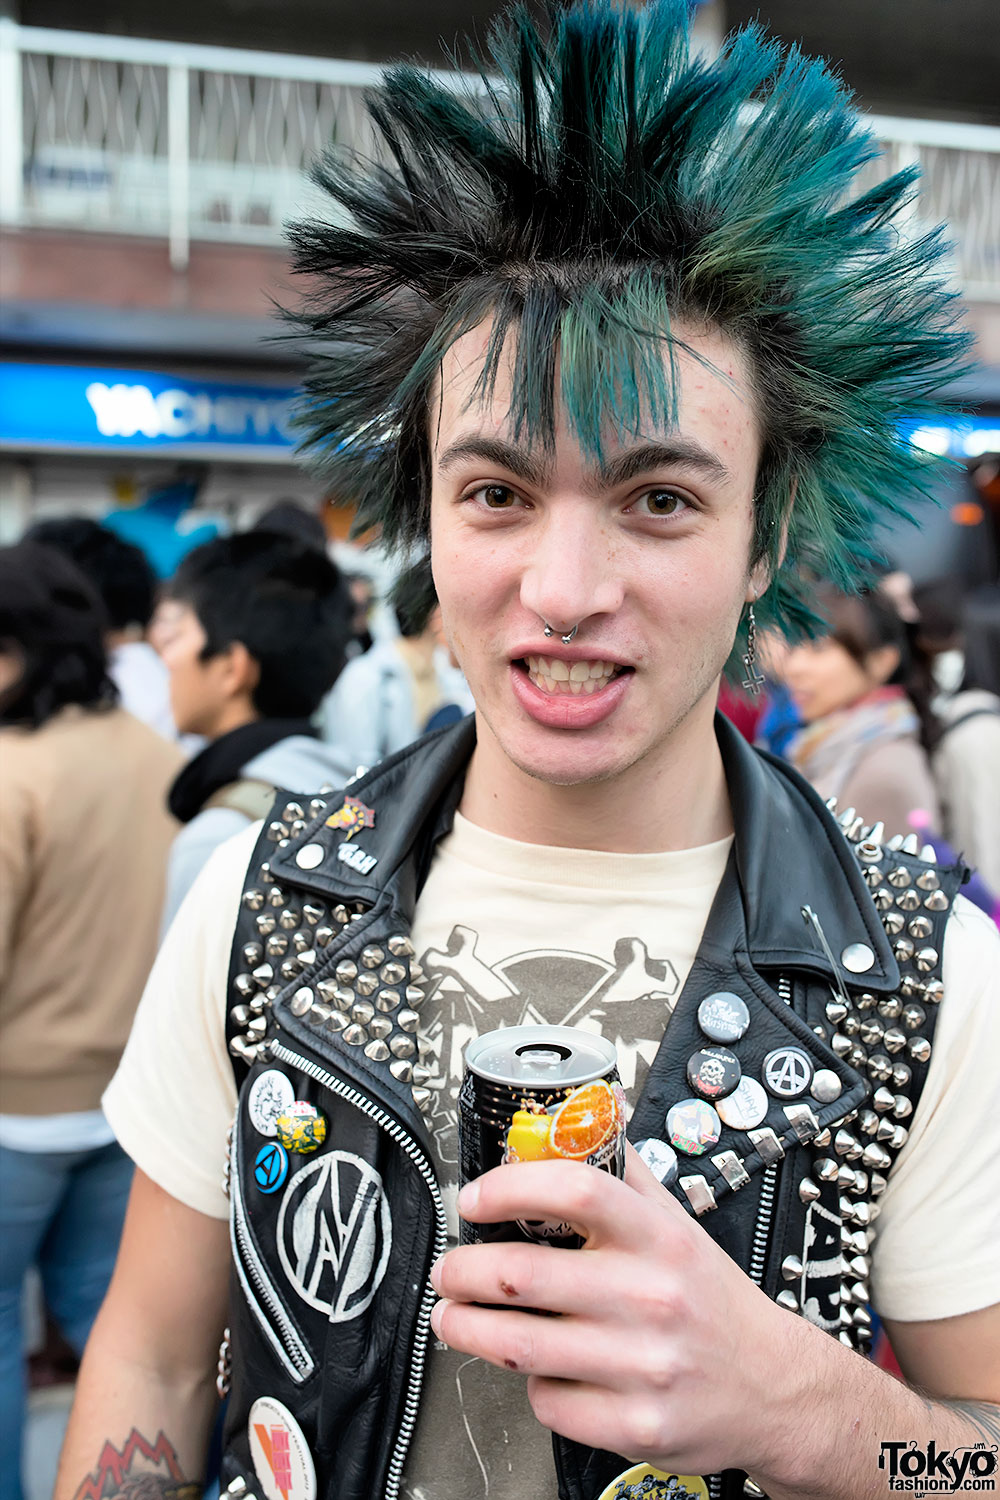 Green Spiked Punk Hairstyle & Leather – Tokyo Fashion News